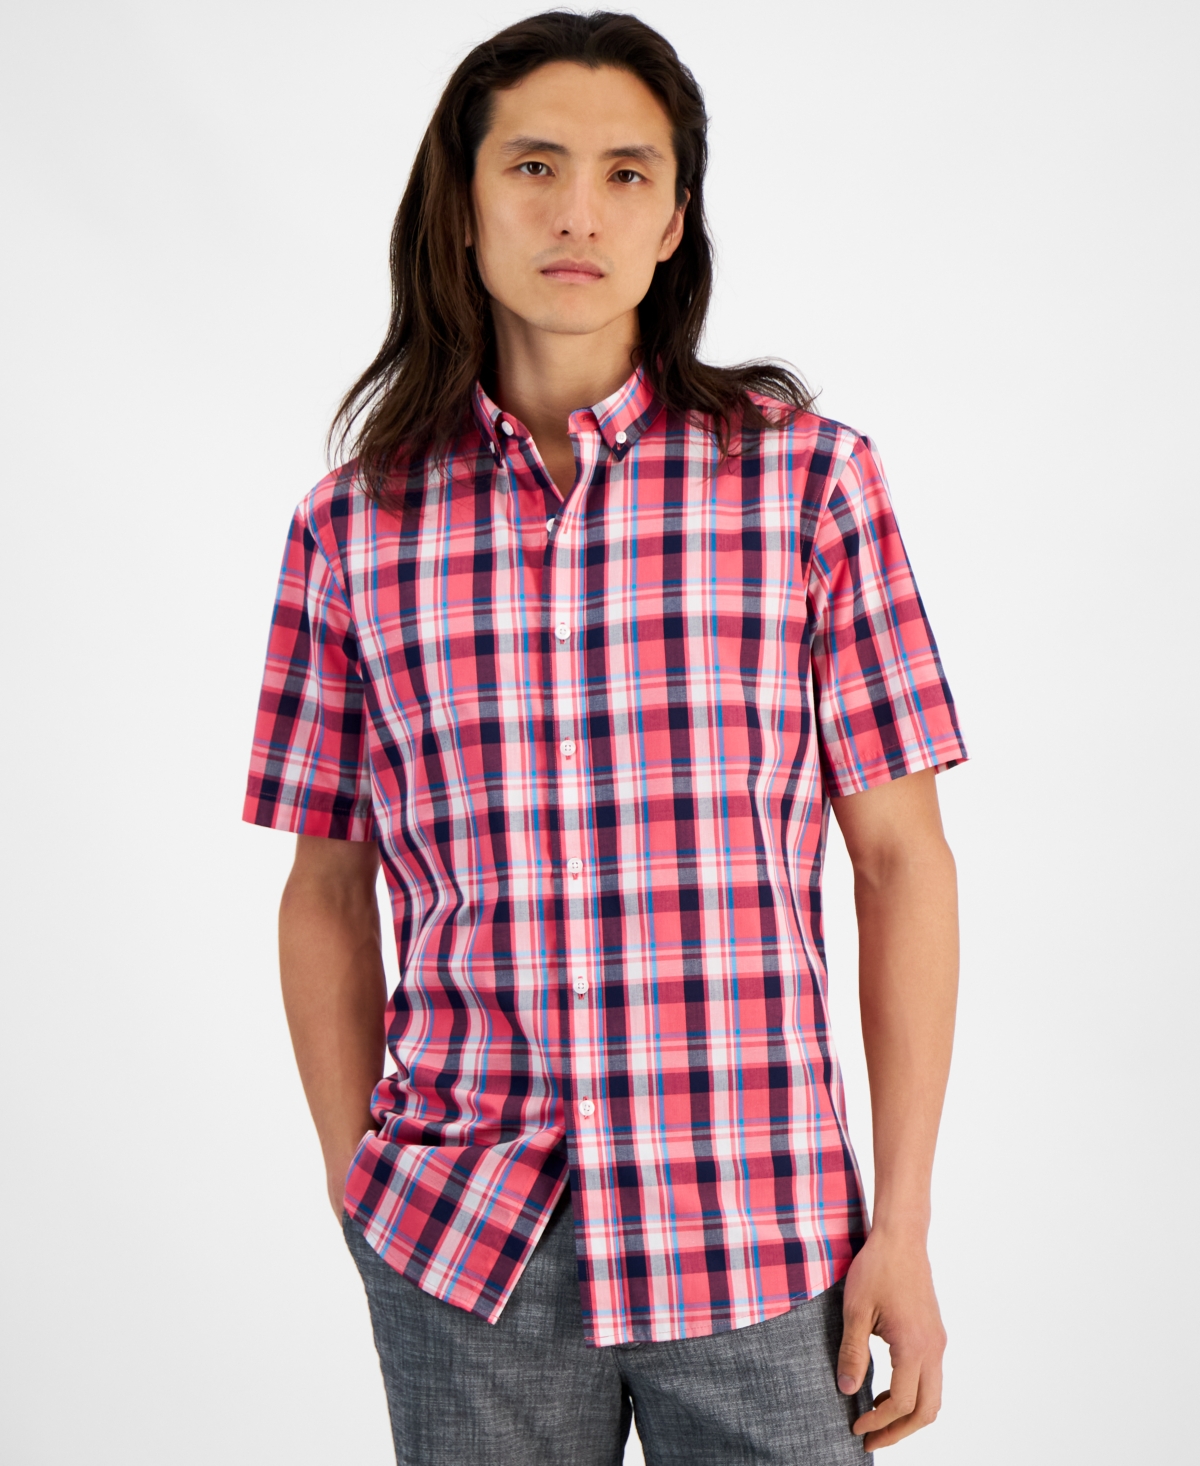 Men's Short Sleeve Printed Shirt, Created for Macy's - Navy Blue Check